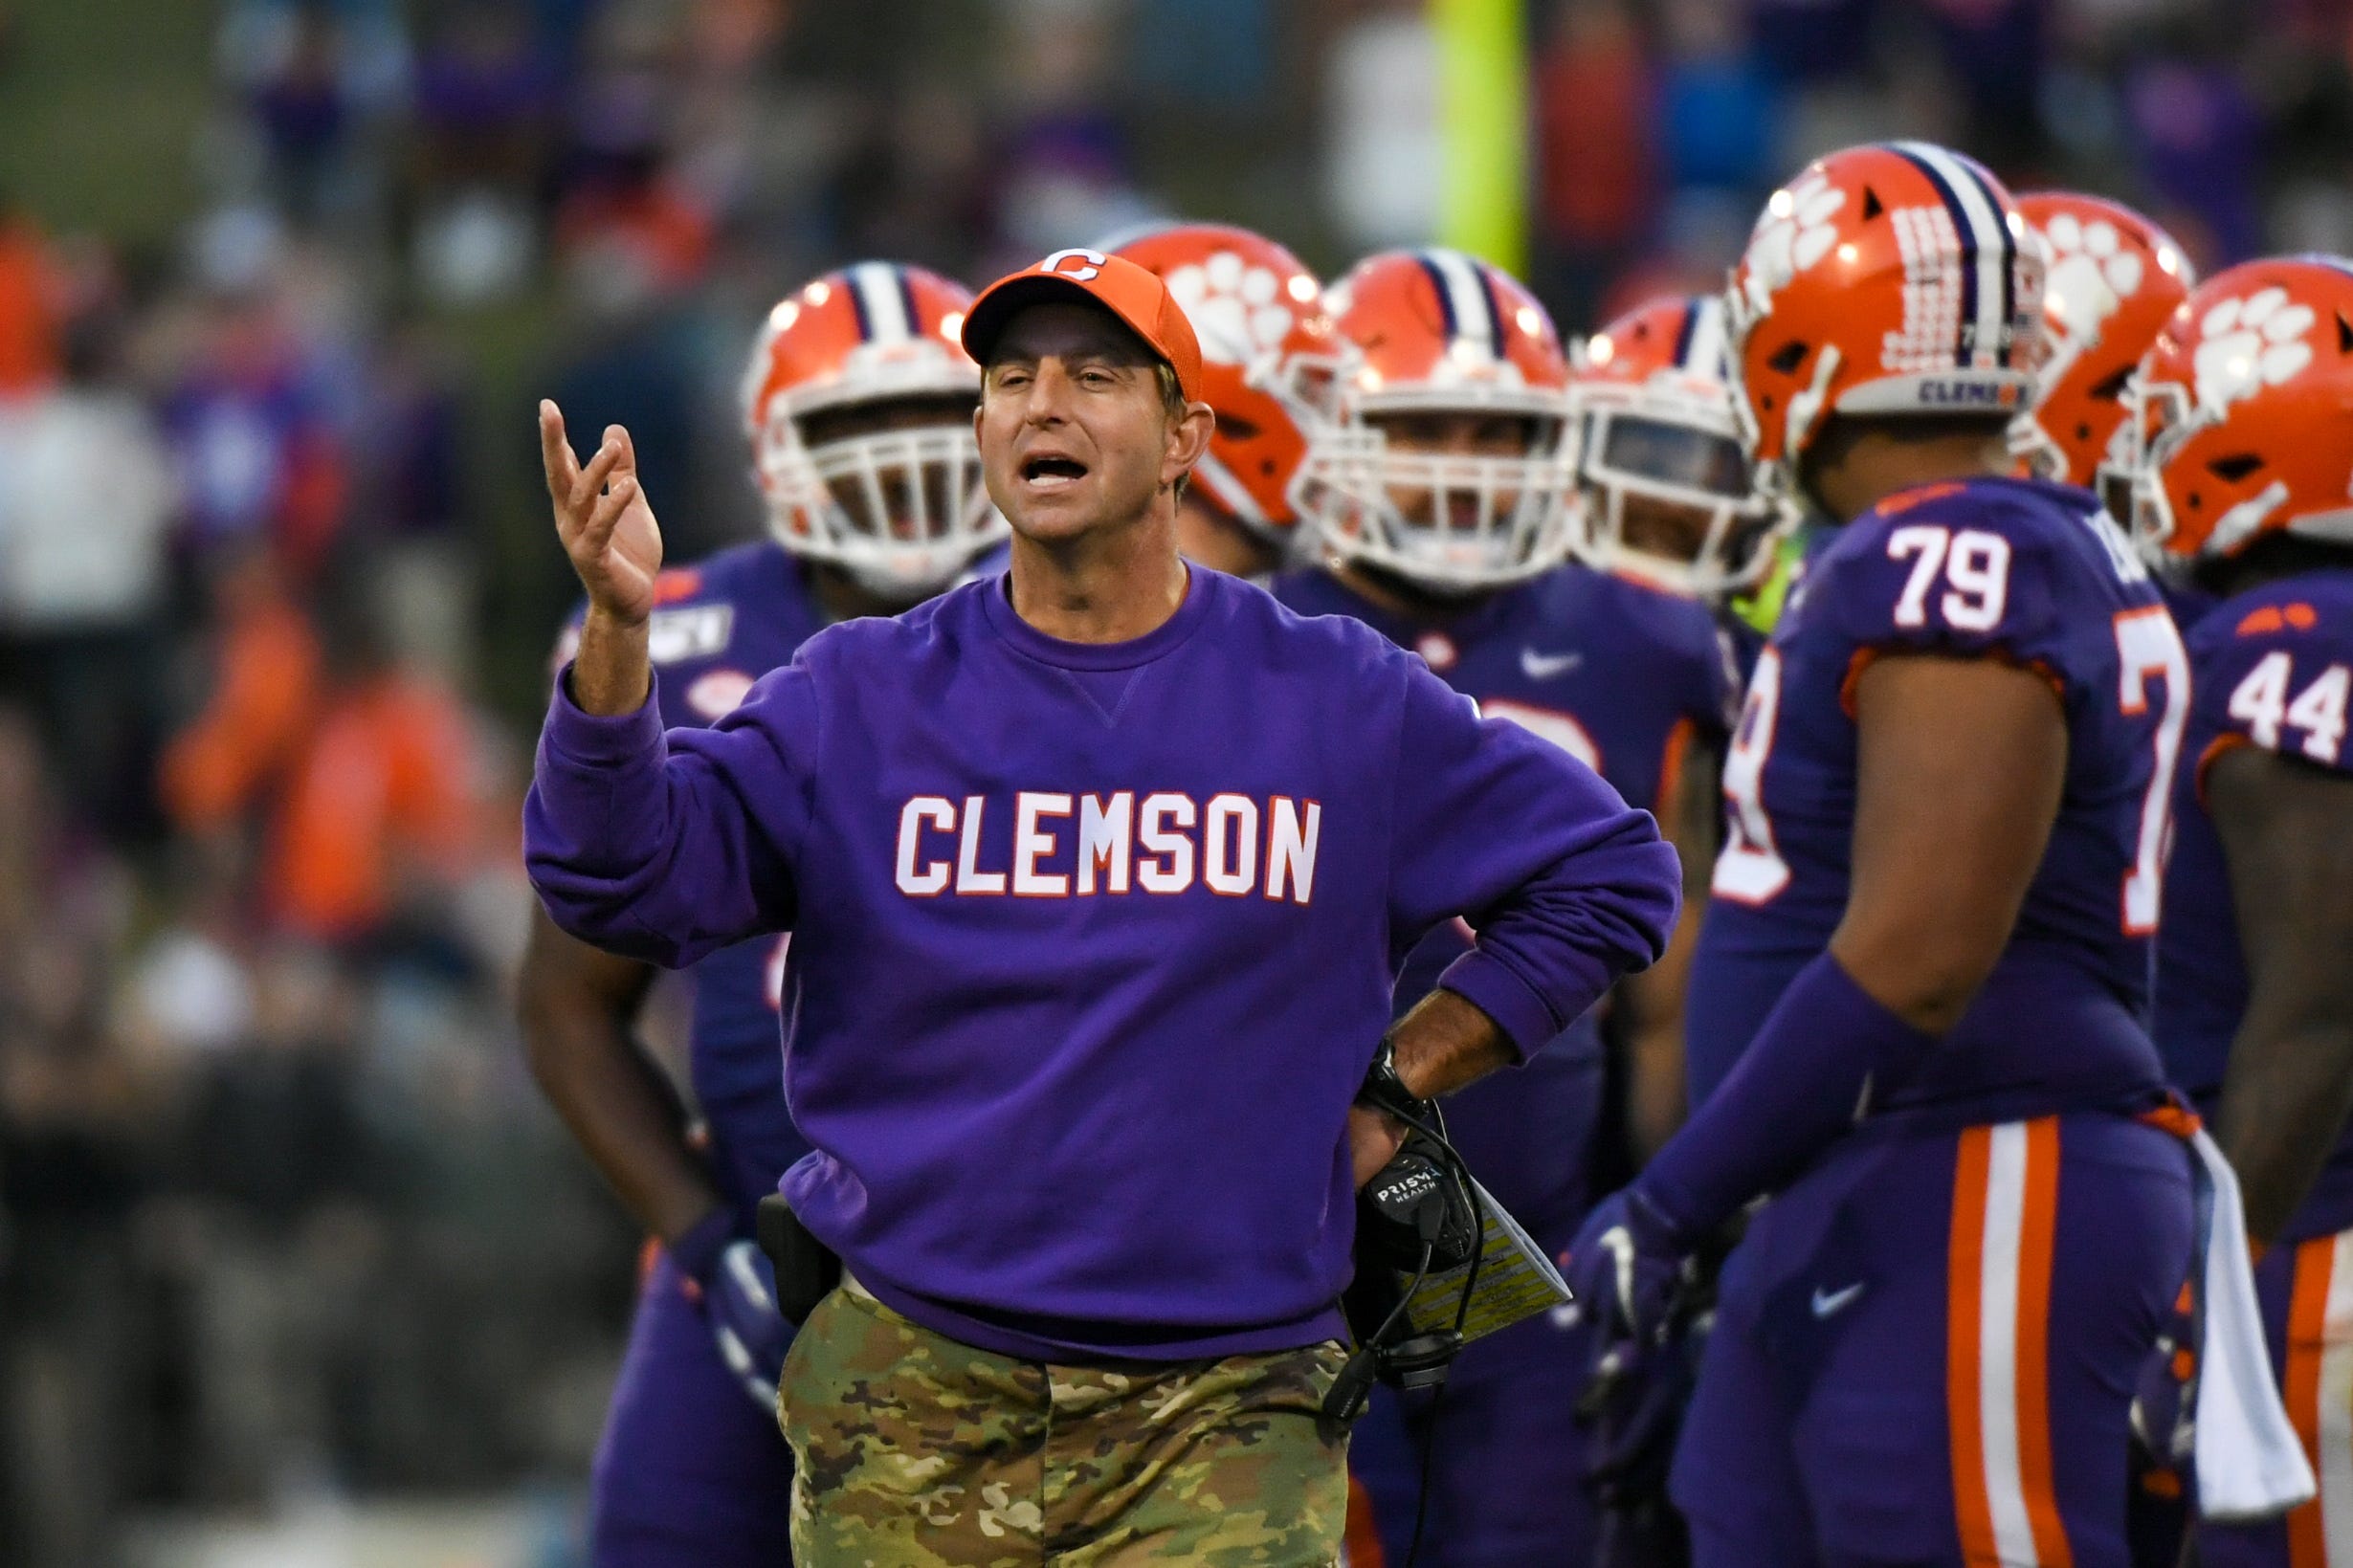 Ex-Clemson football player Kanyon Tuttle calls out coach Dabo Swinney, tells him to 'take a stand' on racism